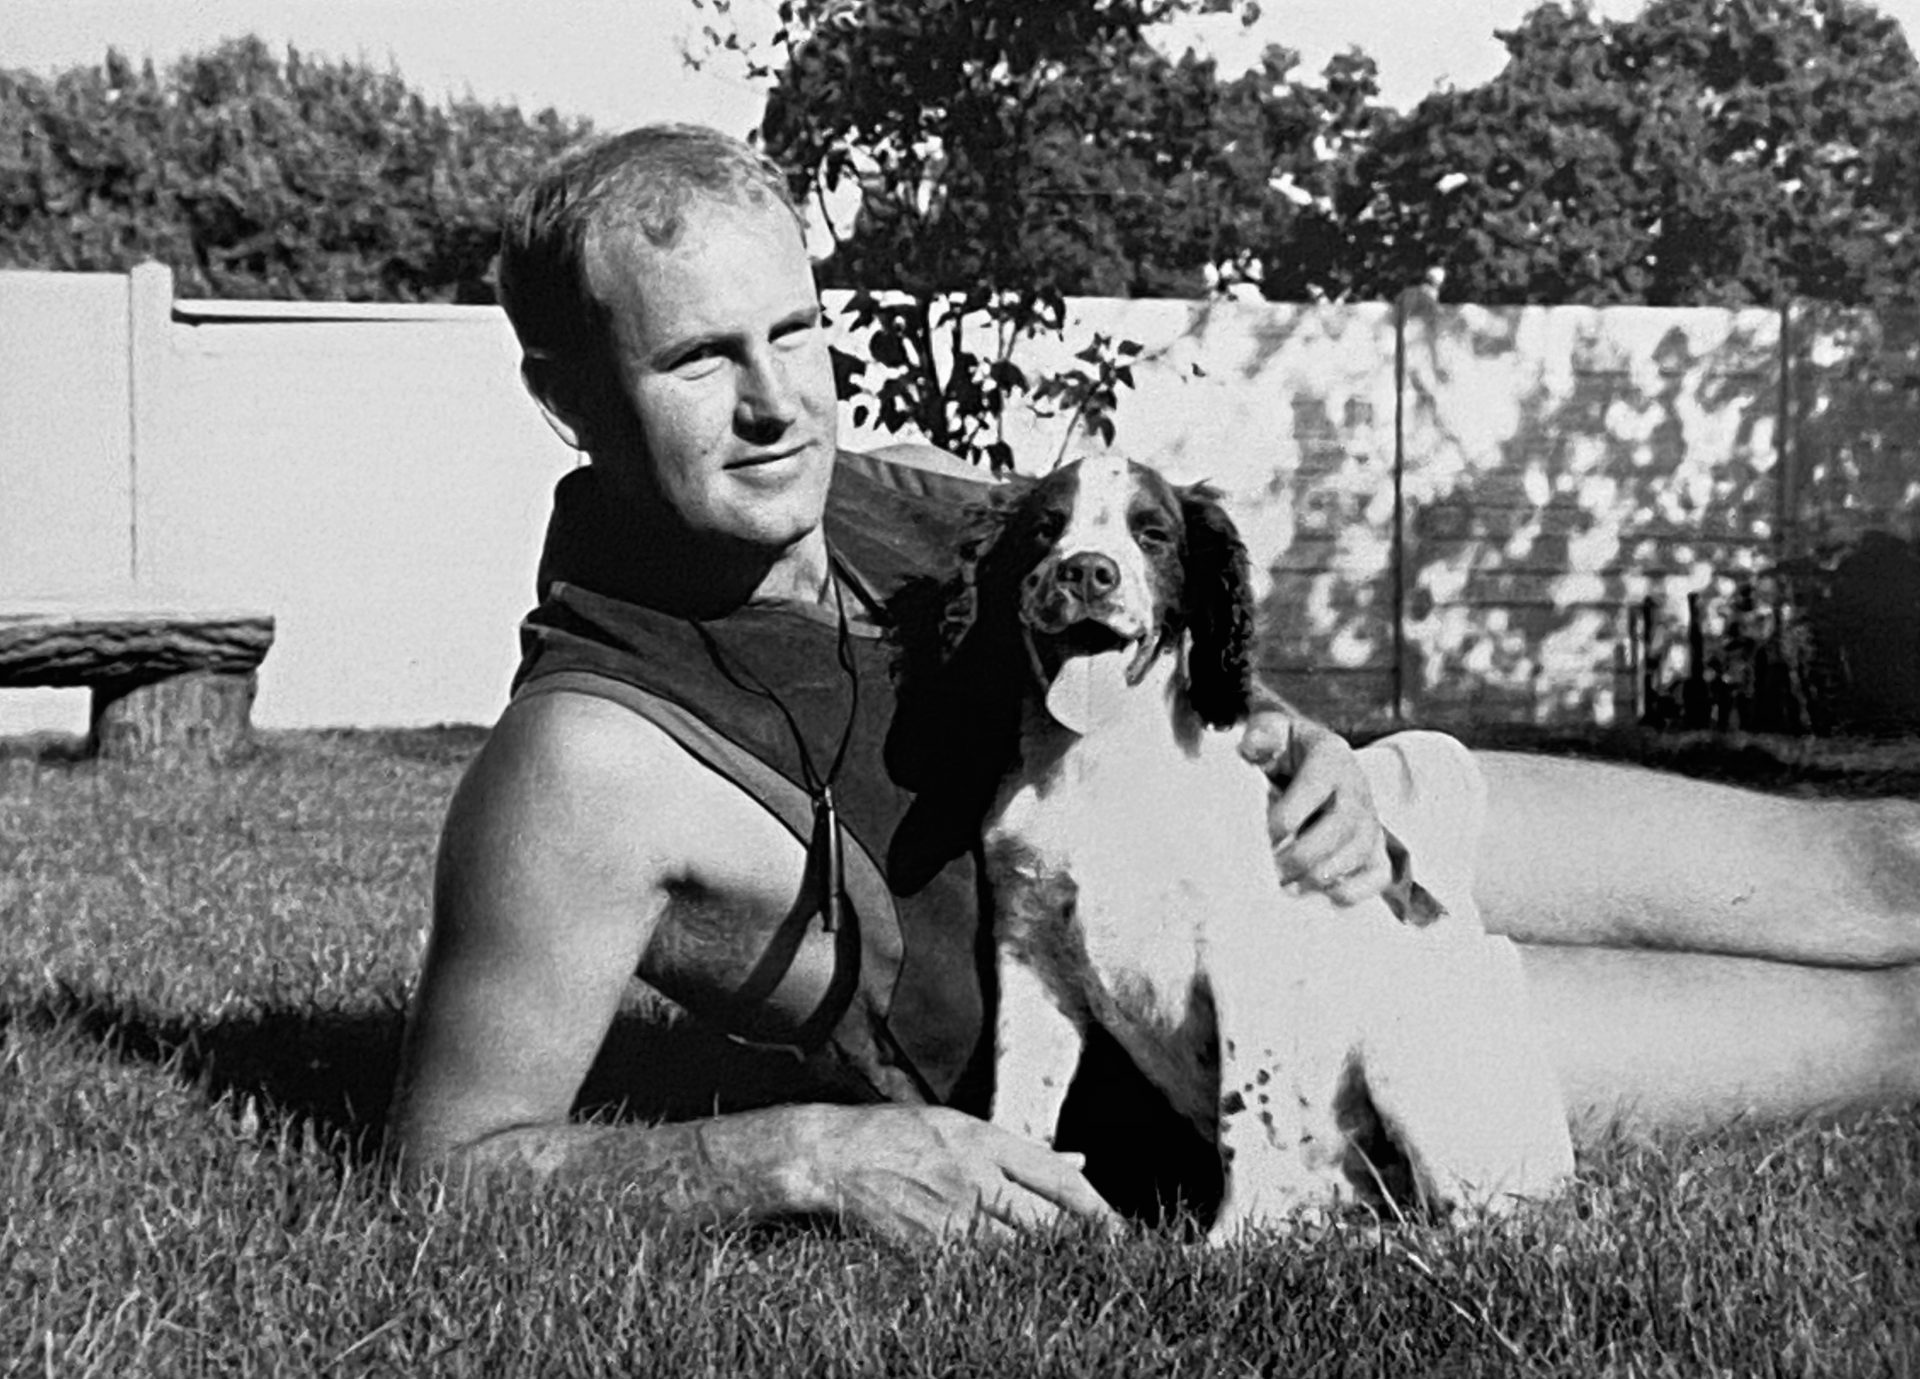 Mark with Tinker the puppy, aged 4 months